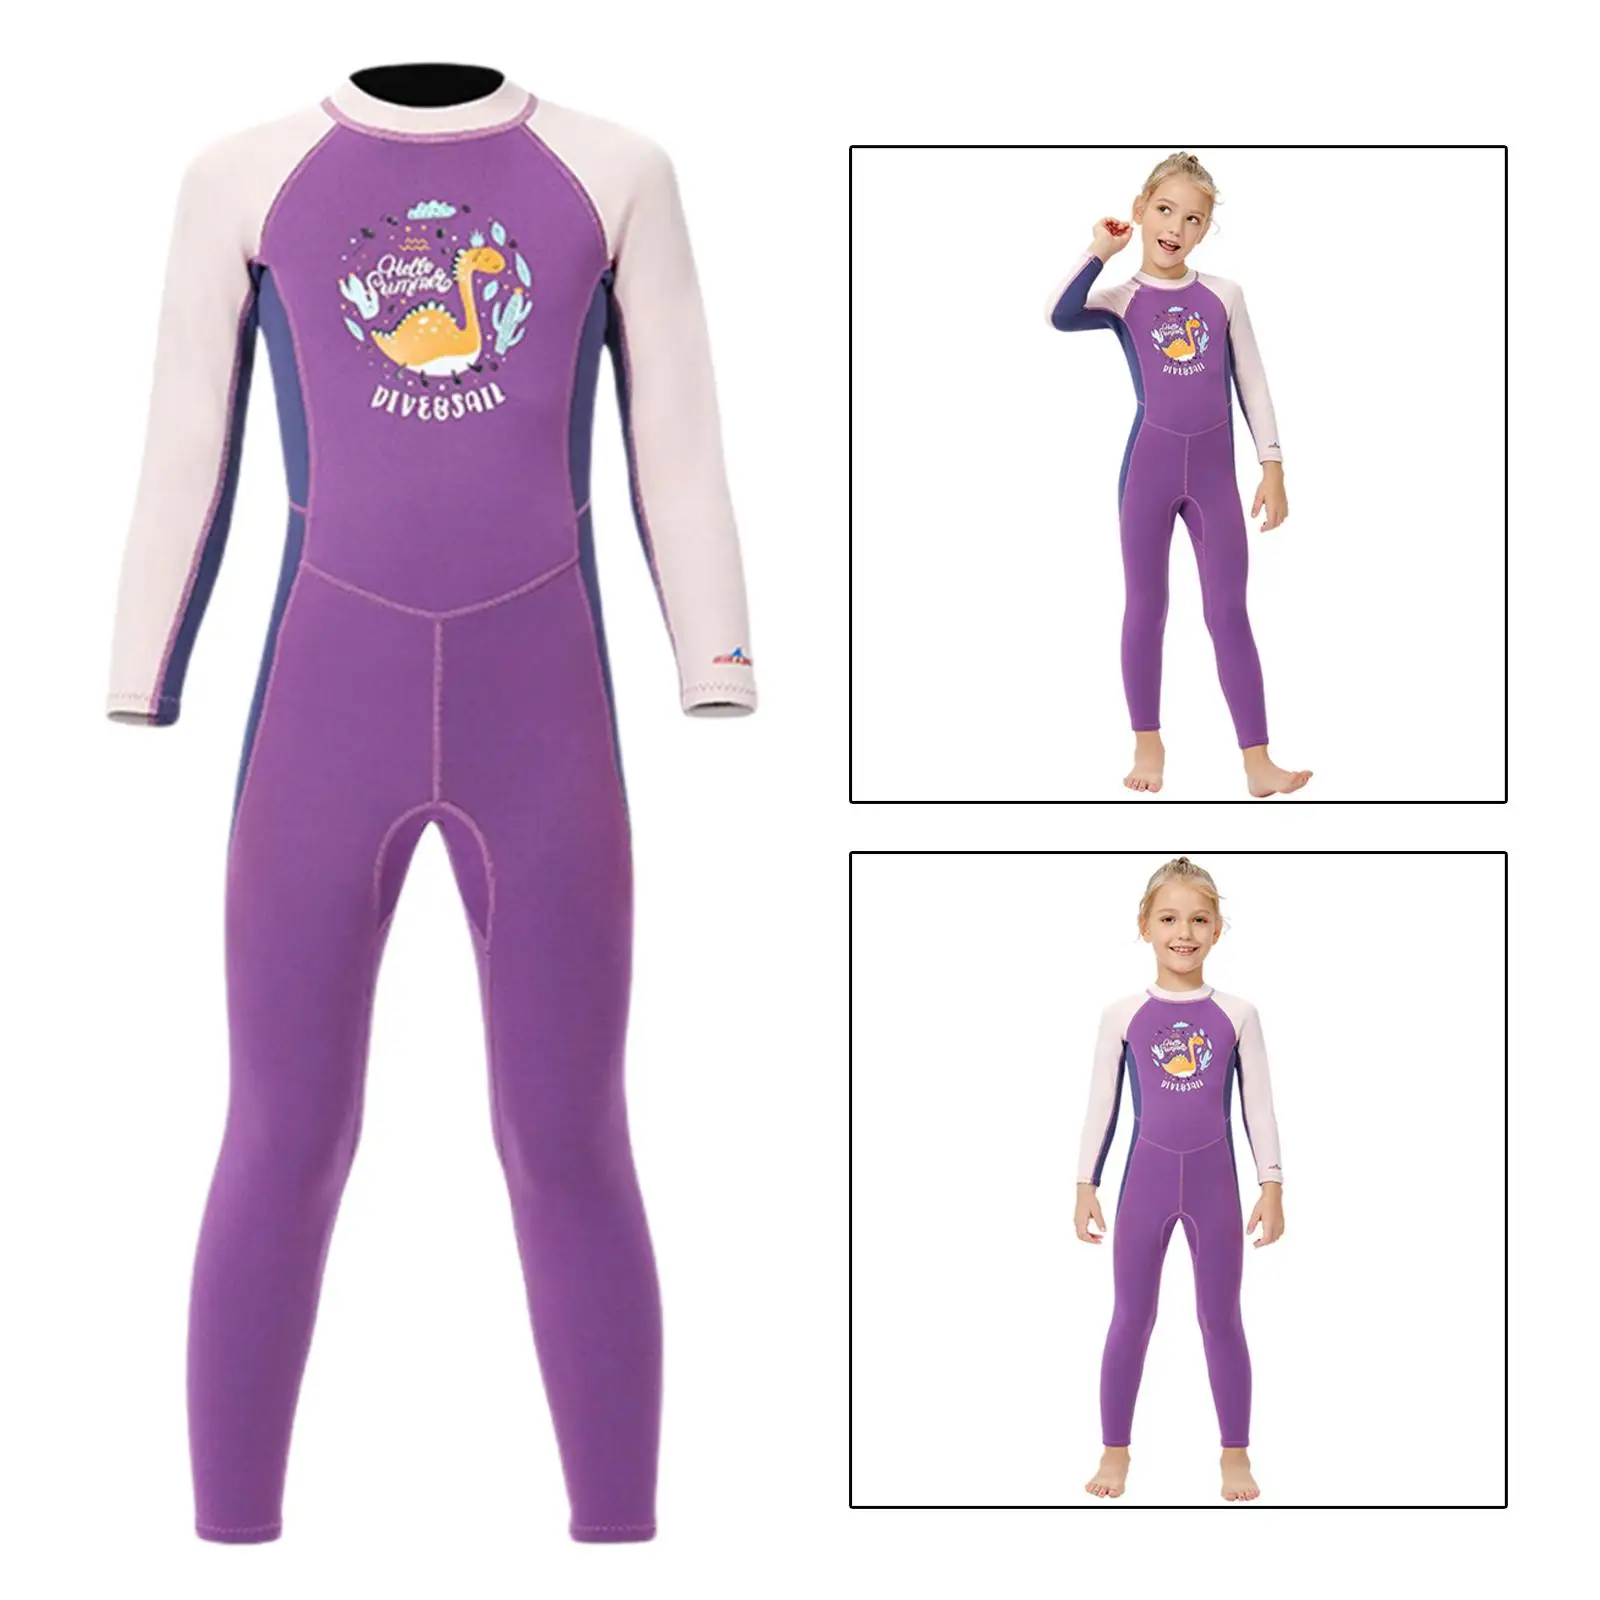 Little Childrens Full Length Wetsuit 2.5mm   Kayak Swimsuit Diving suits Suit for Boys Girls Diving Scuba Fishing Water